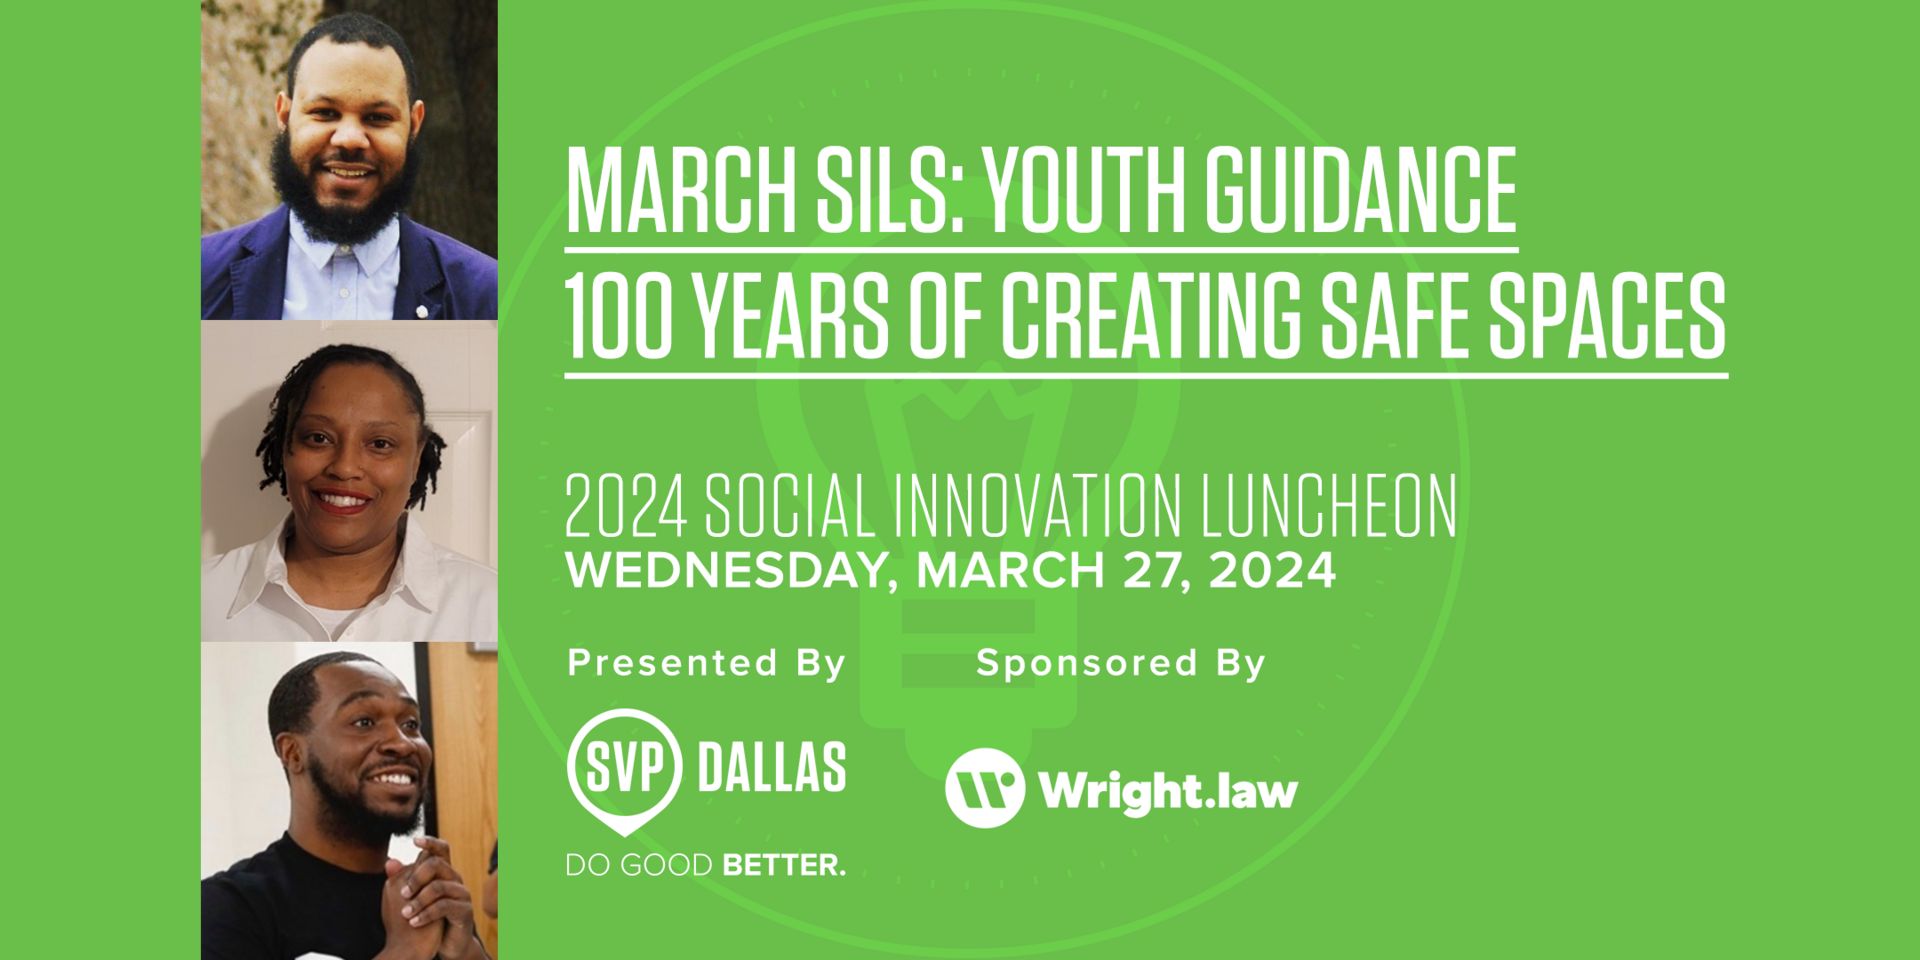 SILS Luncheon: Youth Guidance - 100 Years of Creating Safe Spaces, Dallas, Texas, United States